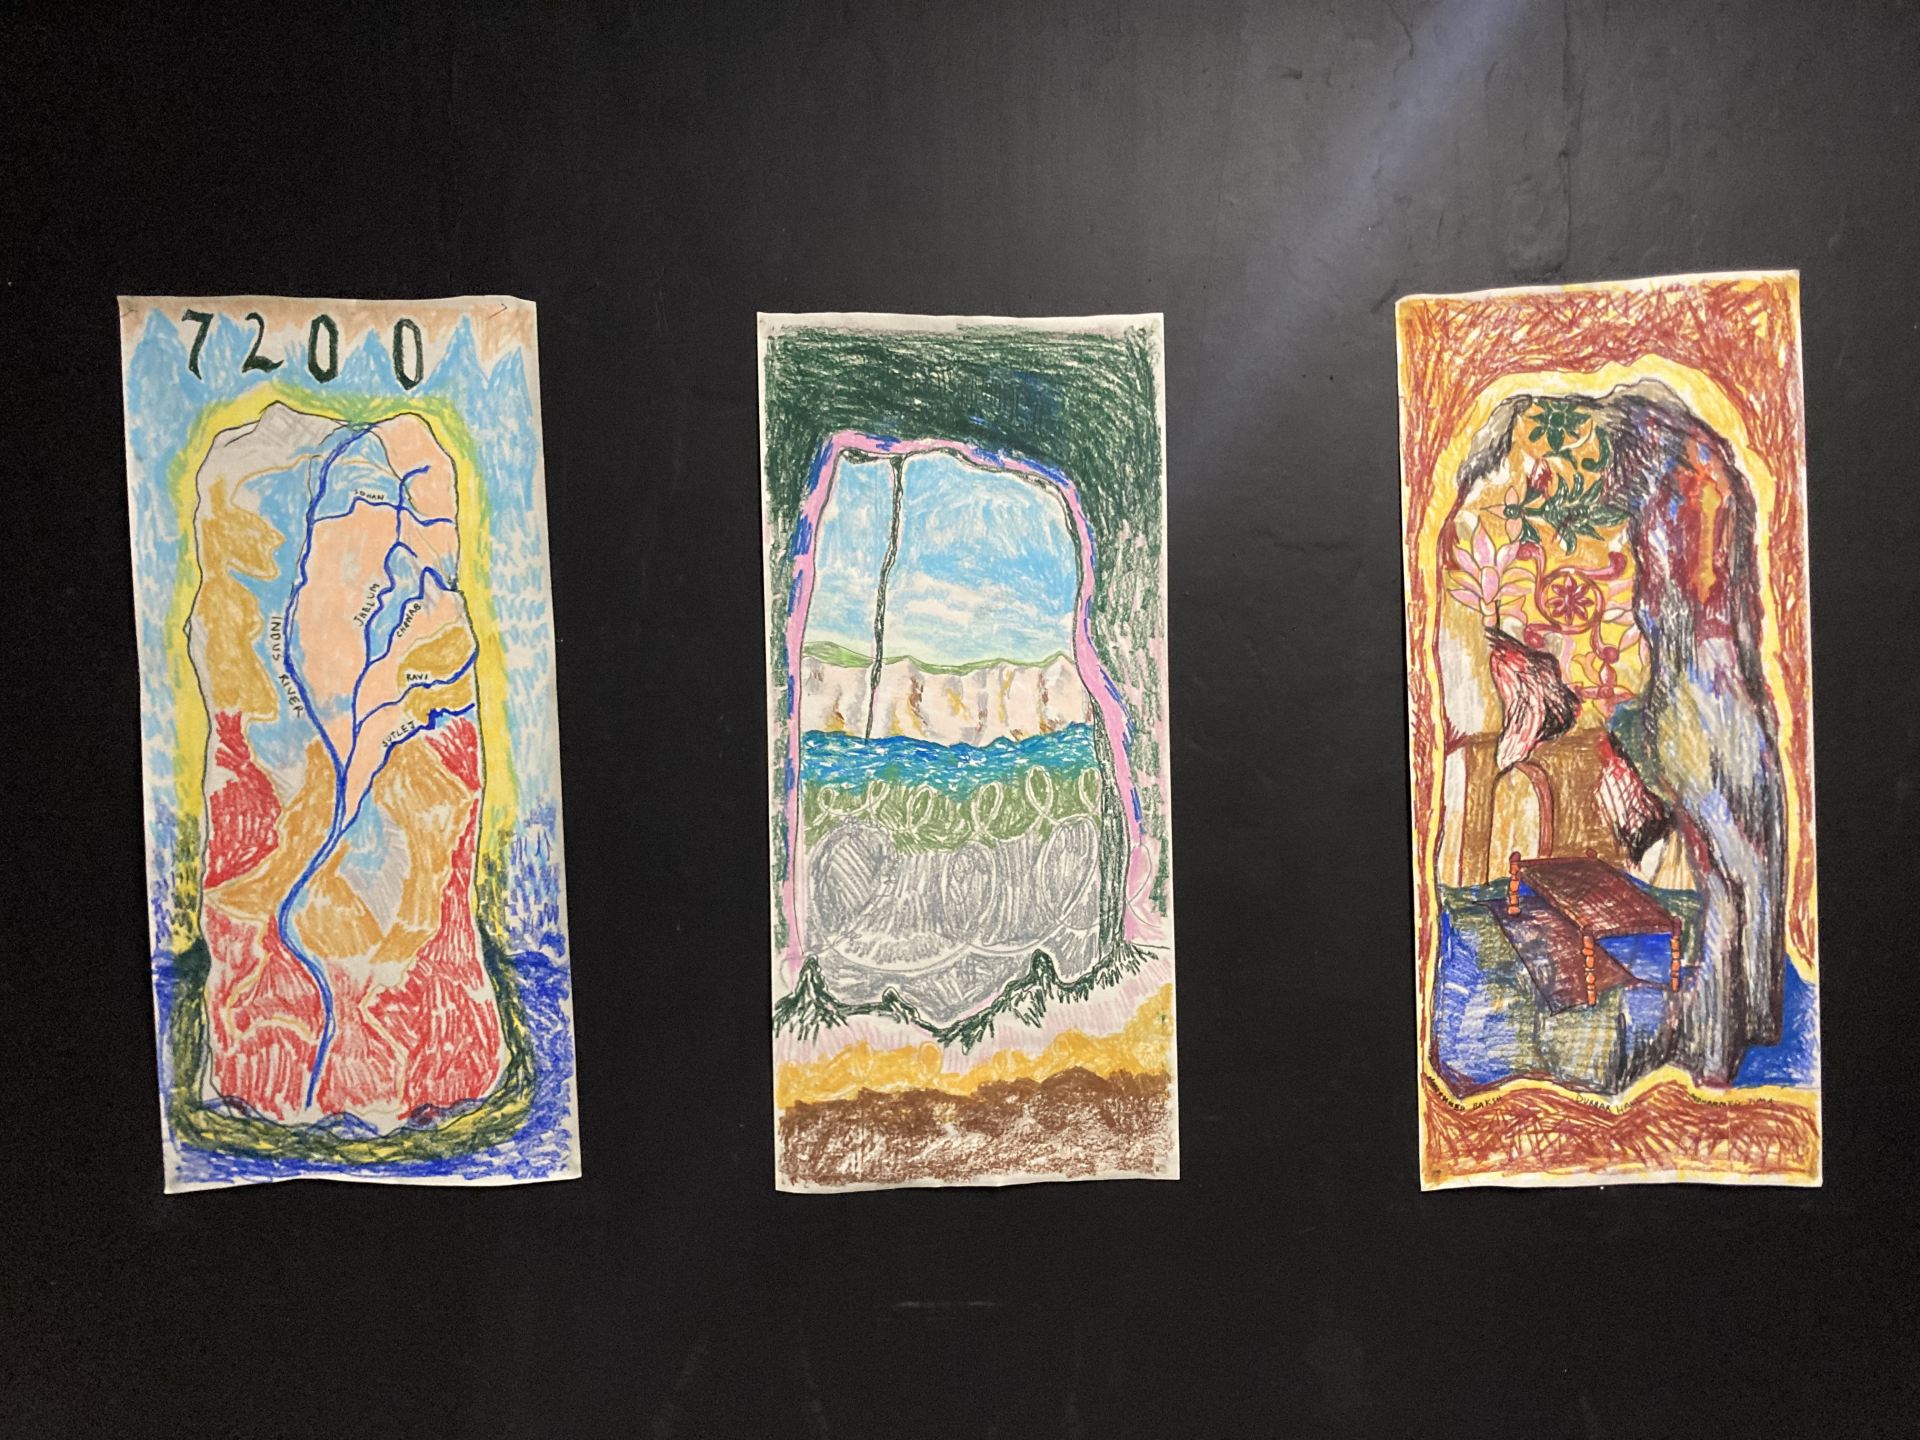 Three drawings in oil pastel on paper, one of rivers in Punjab, Pakistan with the number of glaciers in Pakistan written above in gothic font (left) white cliffs and English Channel with barbed wire (centre) and abstract woodcarving motifs (right).